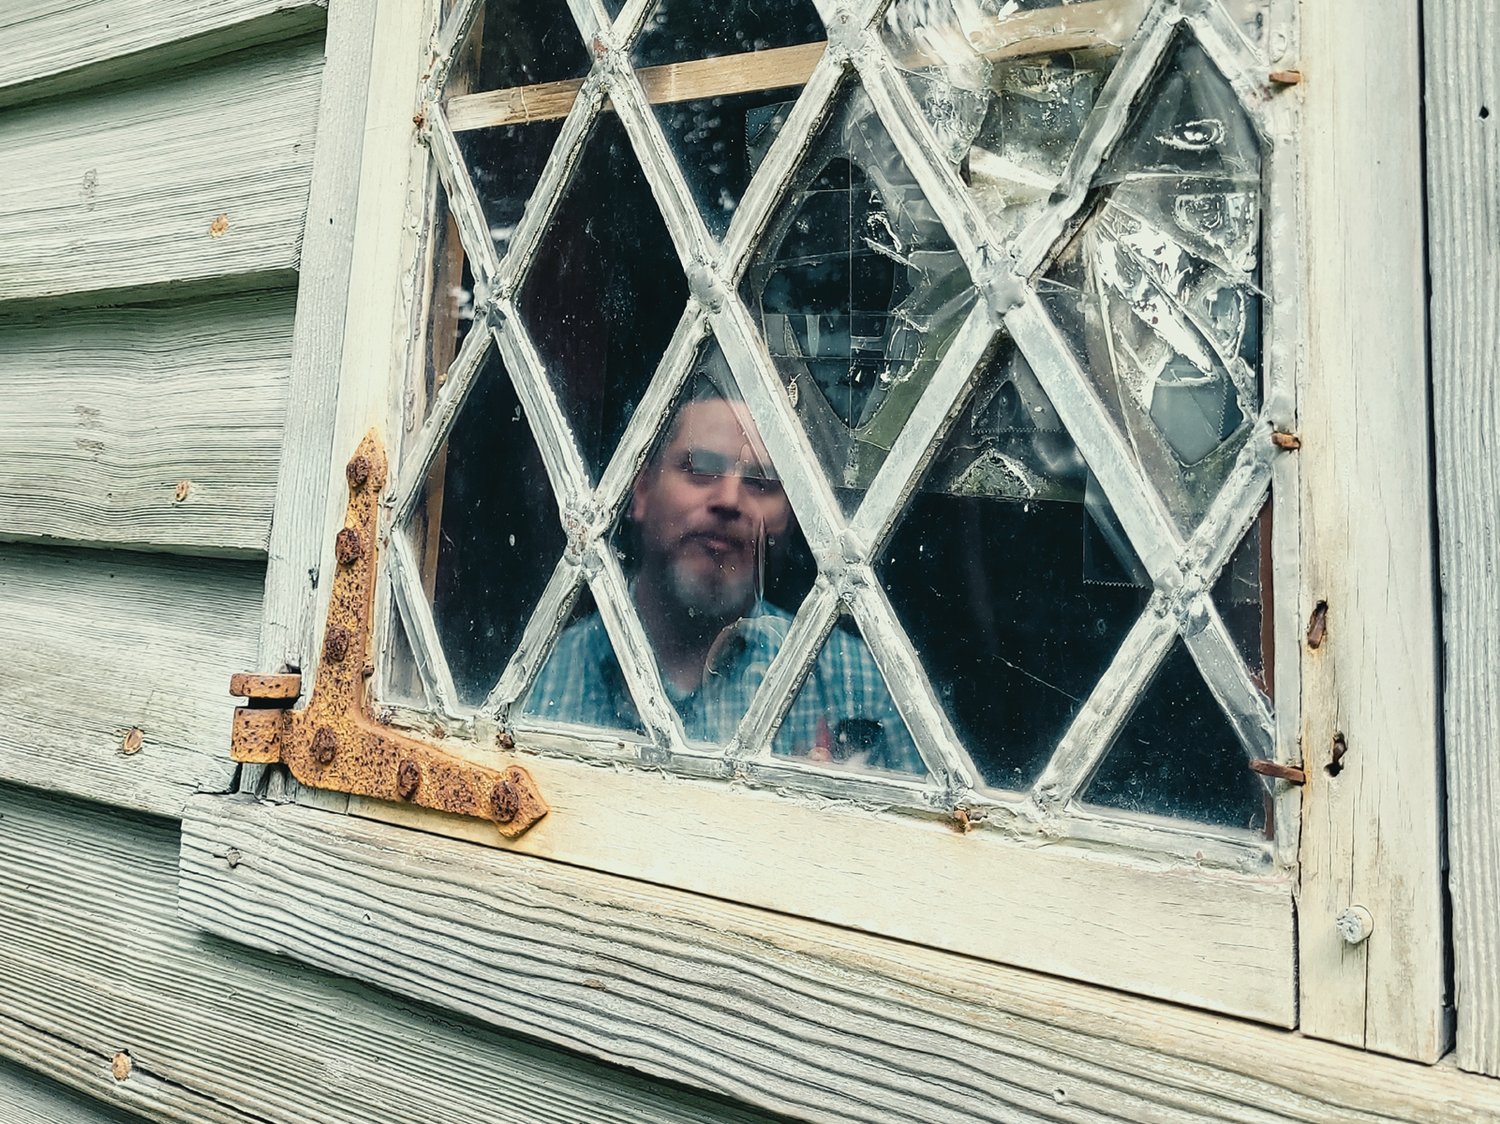 BROKEN GLASS: Historic New England representative Dan Santos, regional site administrator for Southern New England inspects a broken window at the Clemence-Irons House in Johnston.